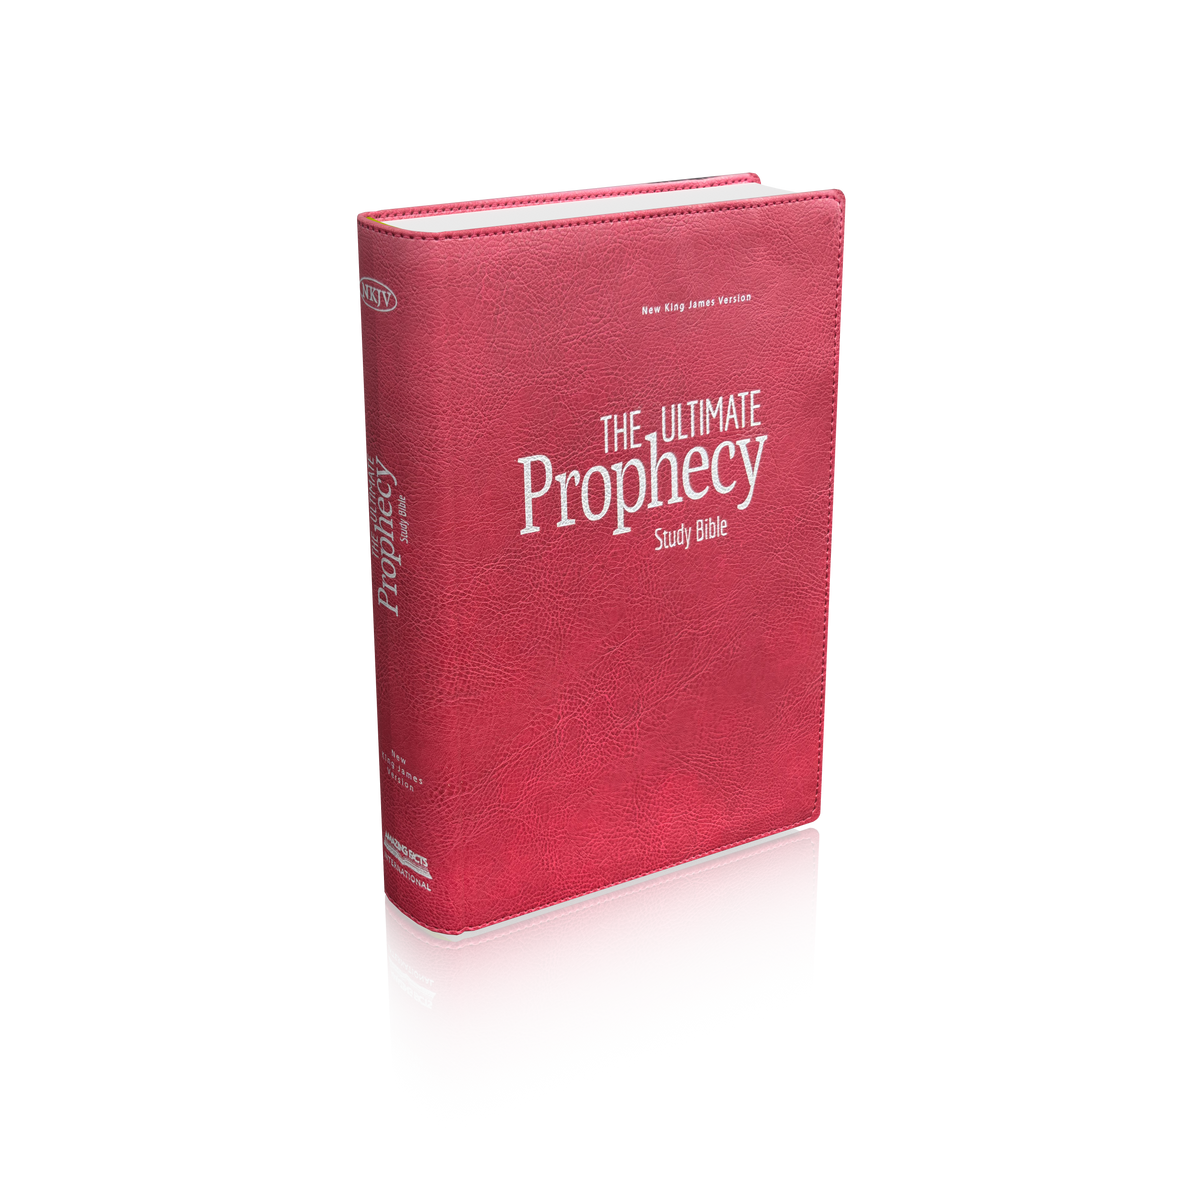 Pre-Order Now! The Ultimate Prophecy Study Bible - Maroon Leathersoft by Amazing Facts